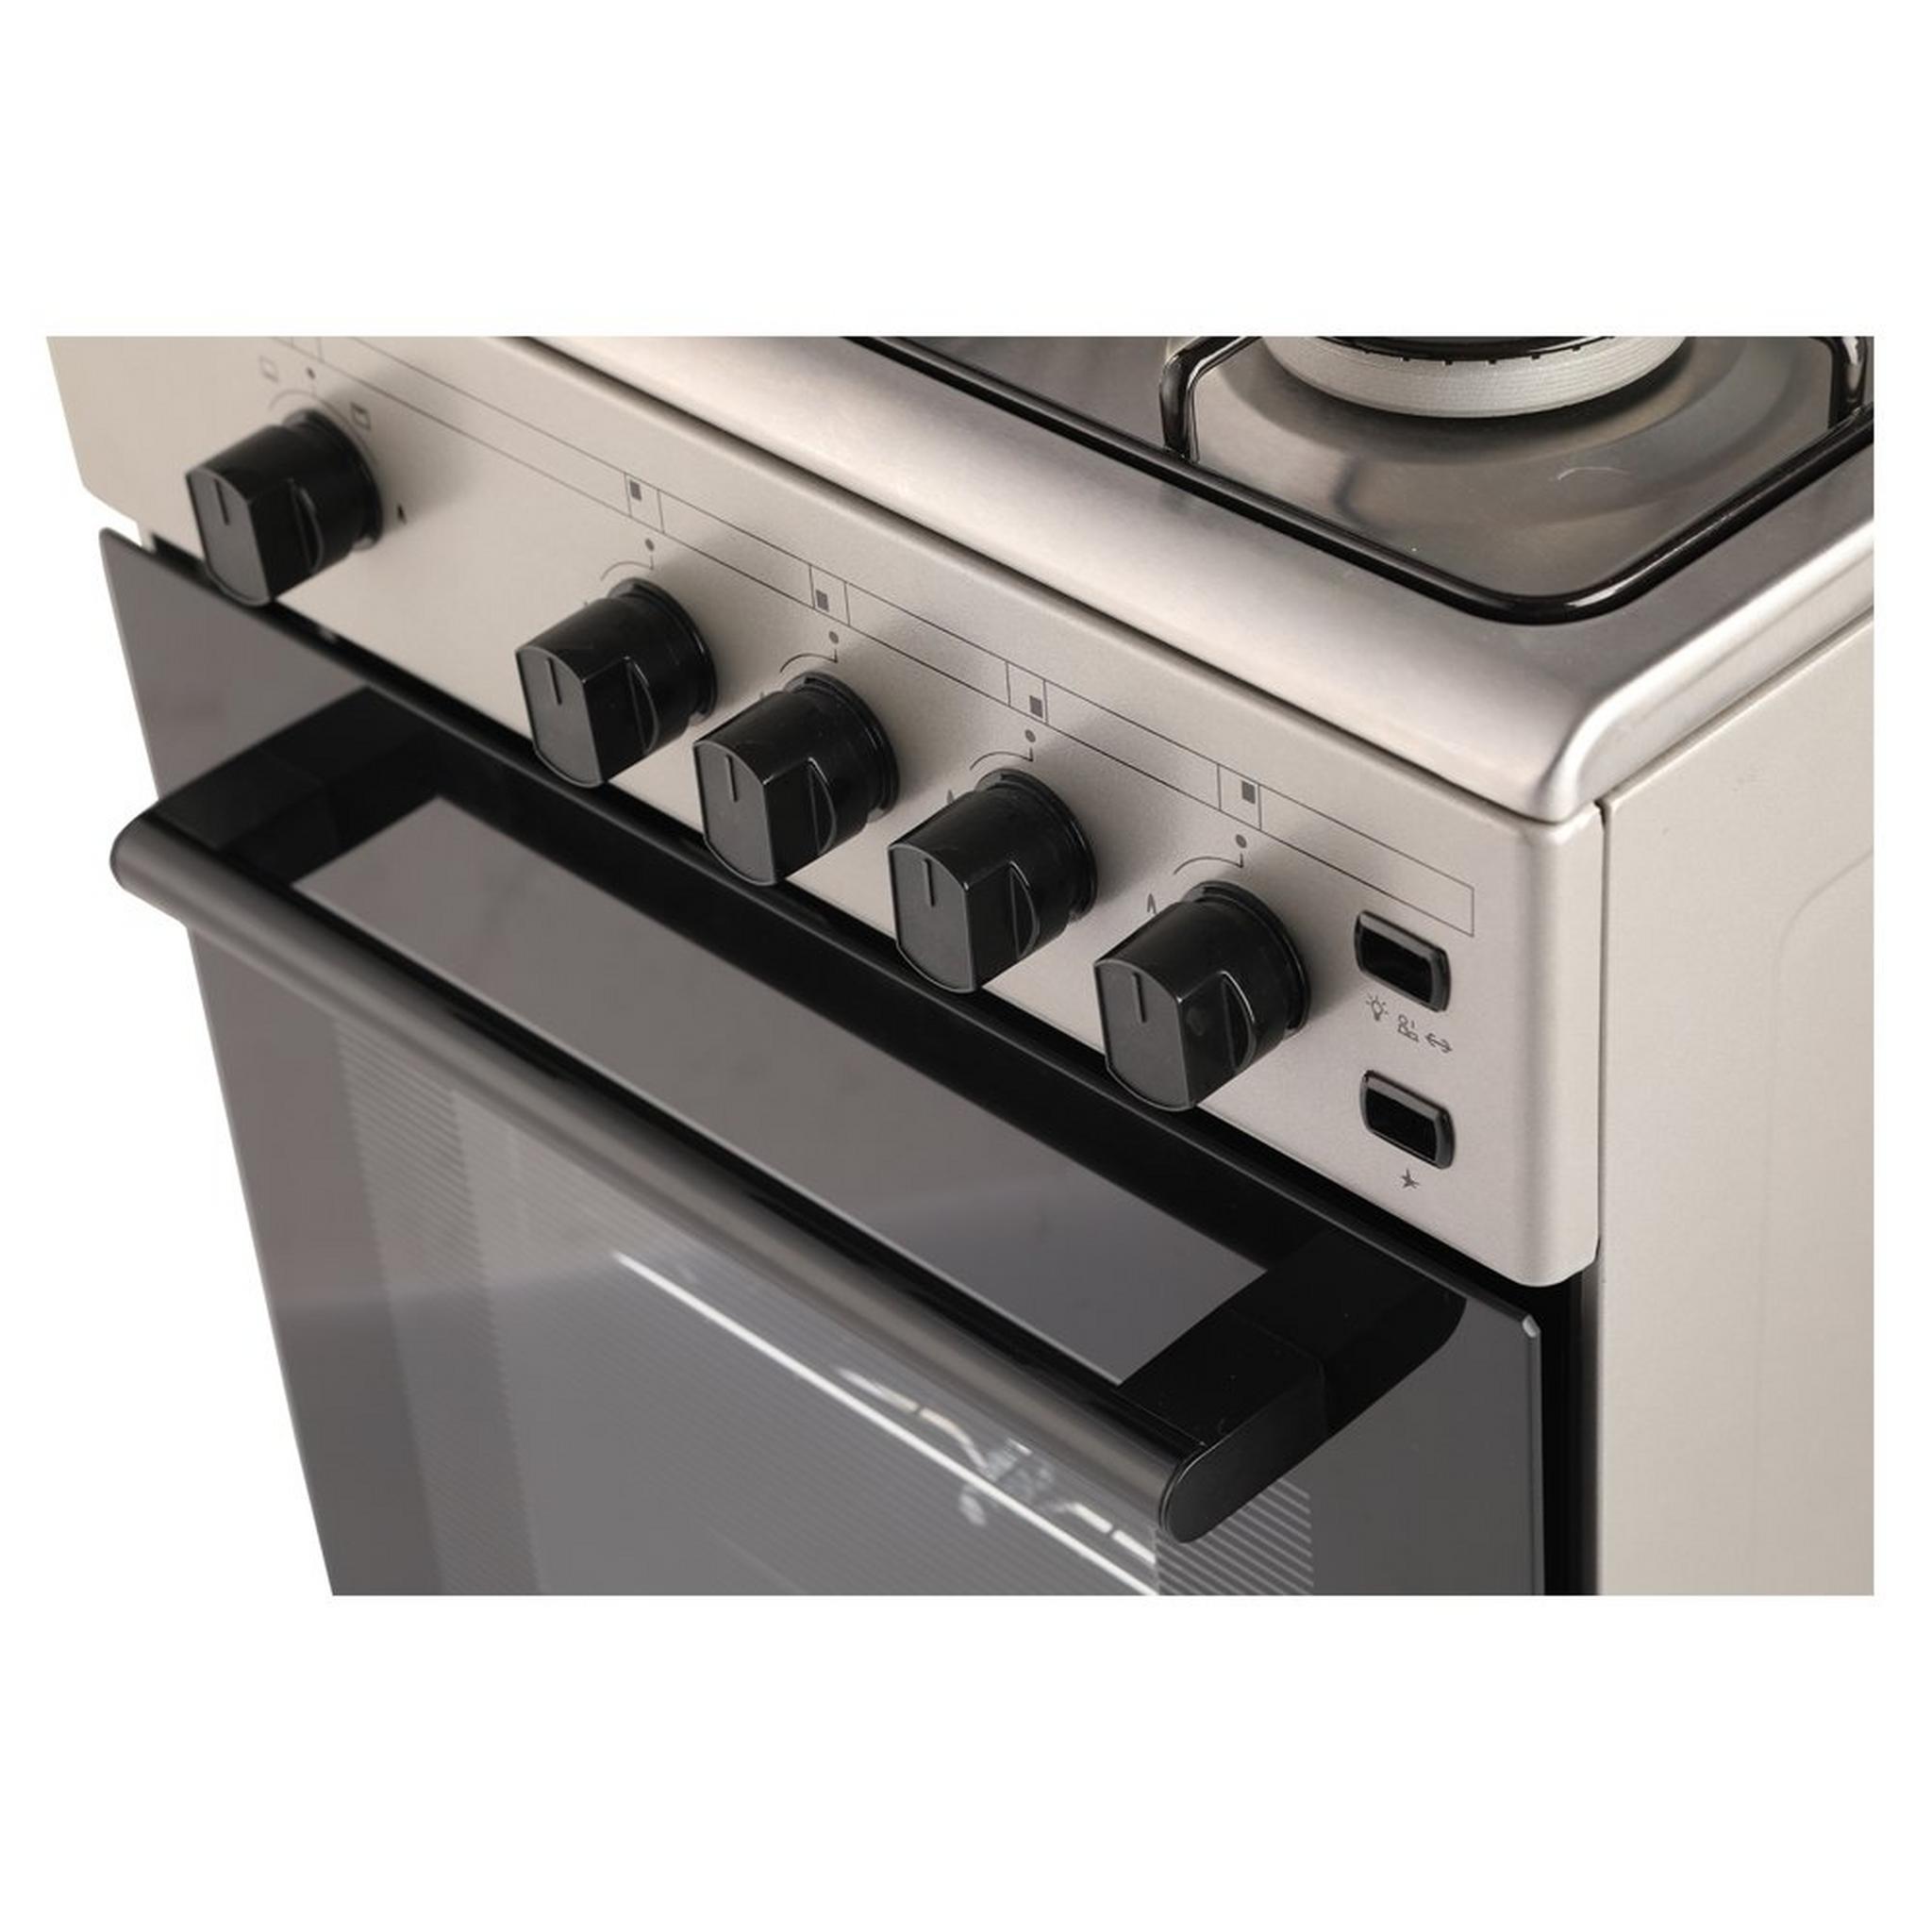 Wansa 50X50cm 4 Burner Gas Cooker (WCT4401XS) - Stainless Steel